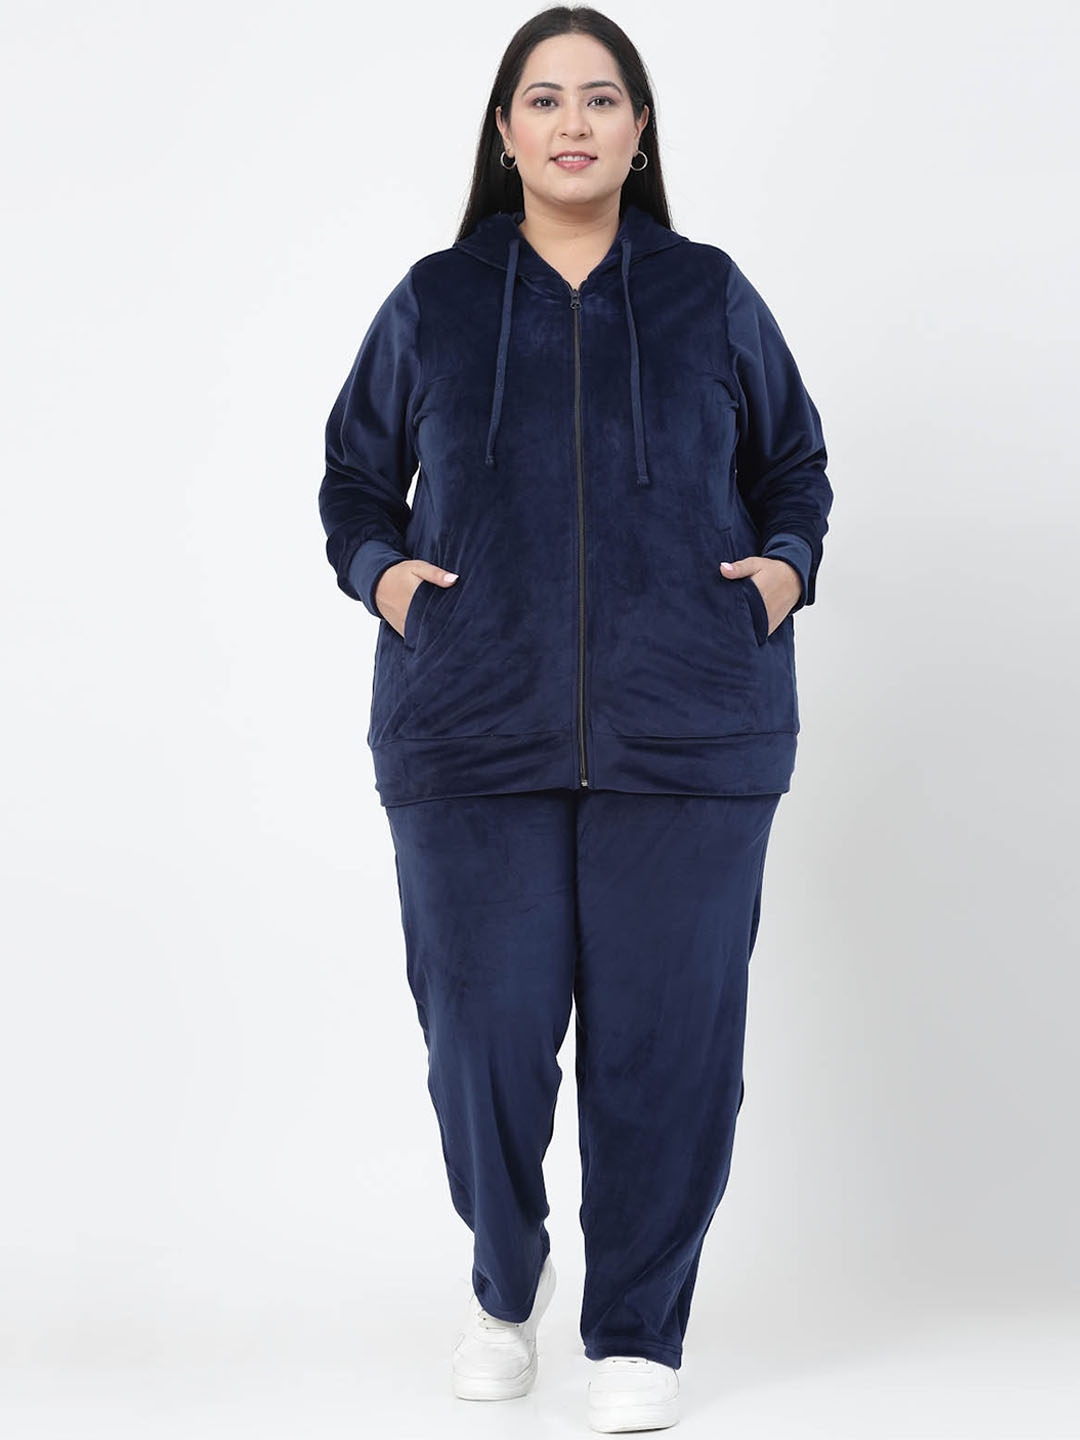 Buy PlusS Plus Size Navy Blue Hooded Mid Rise Velour Tracksuits ...